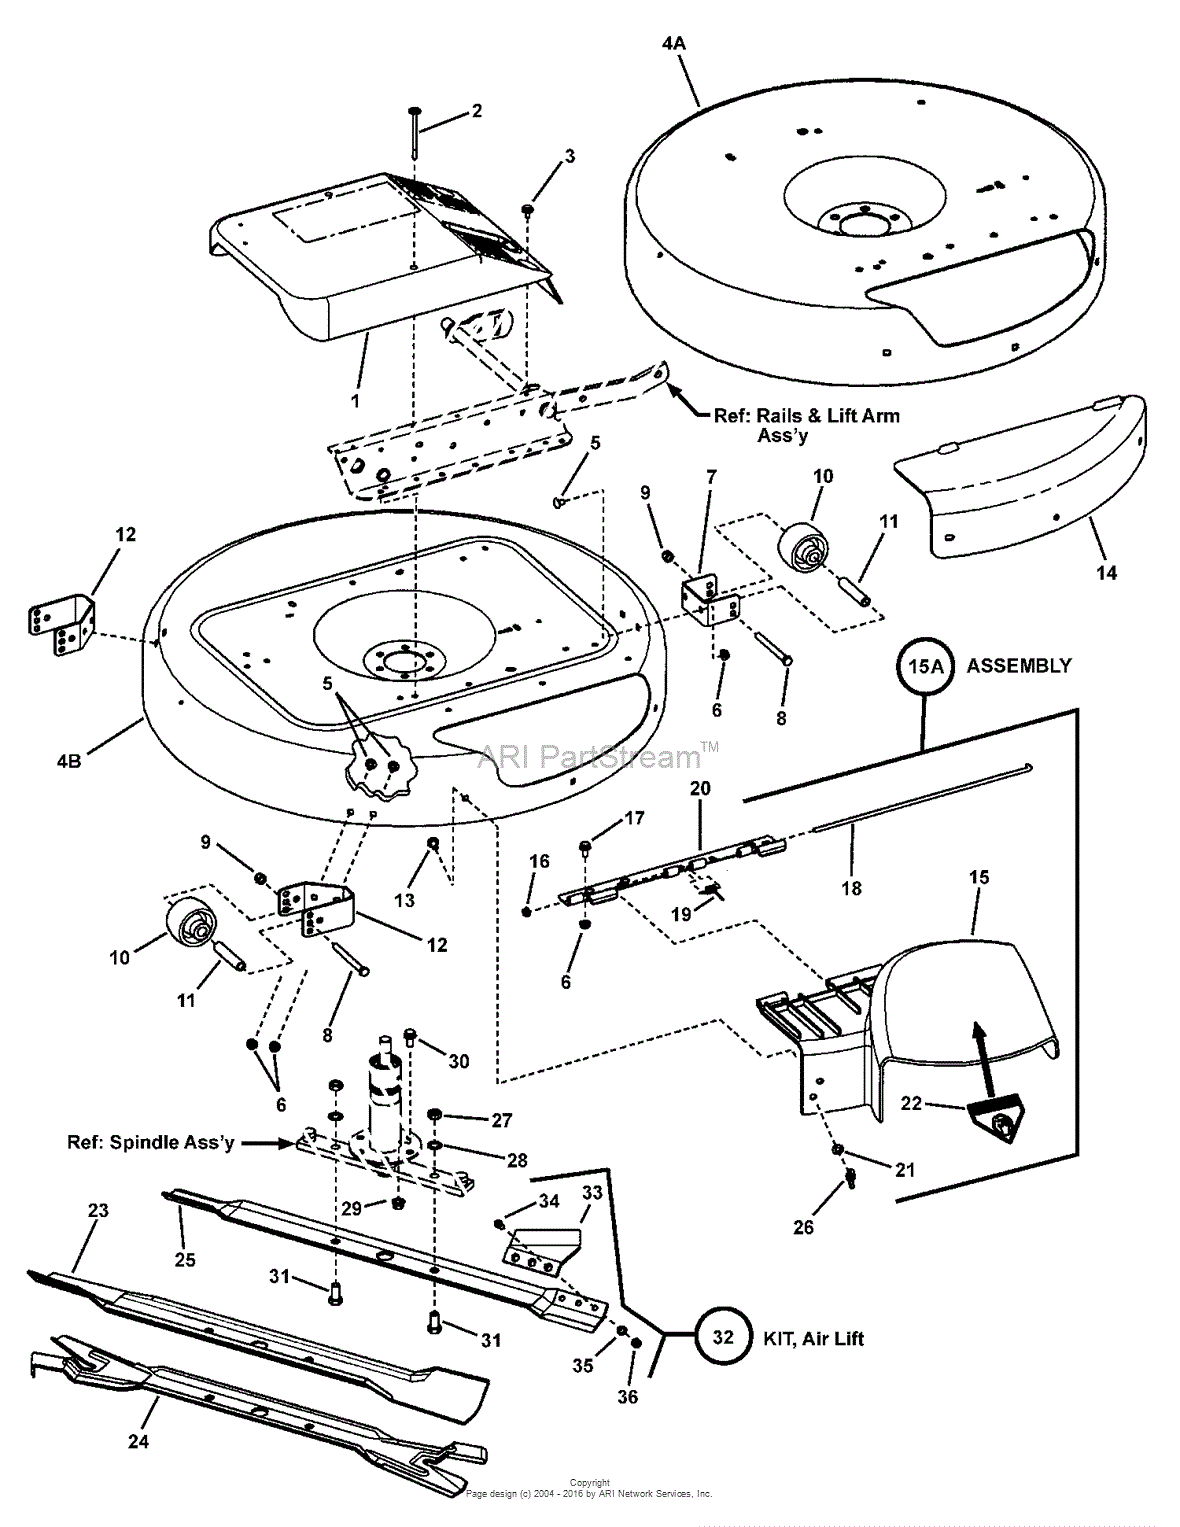 old 10hp rear engine snapper wiring diagram